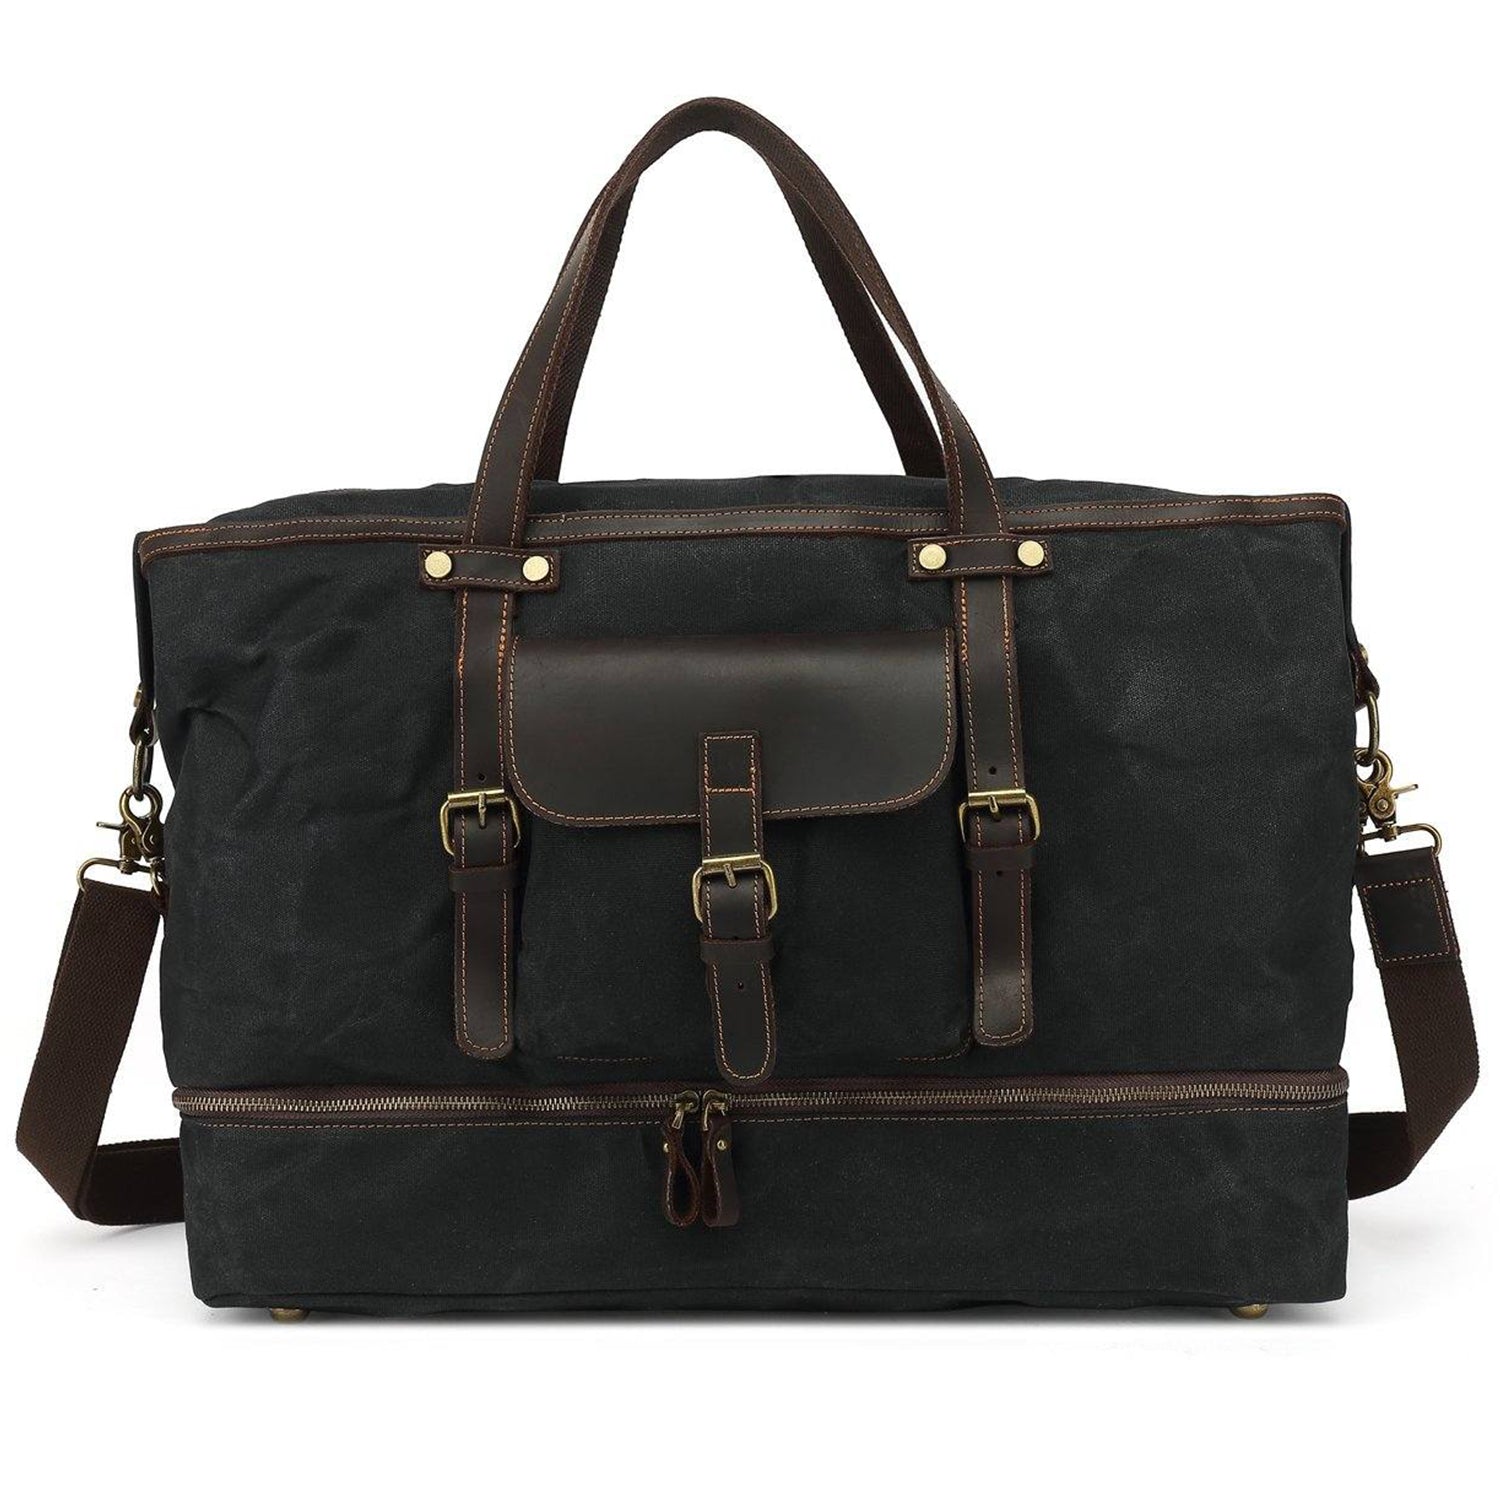 waterproof extra-large waxed canvas luggage